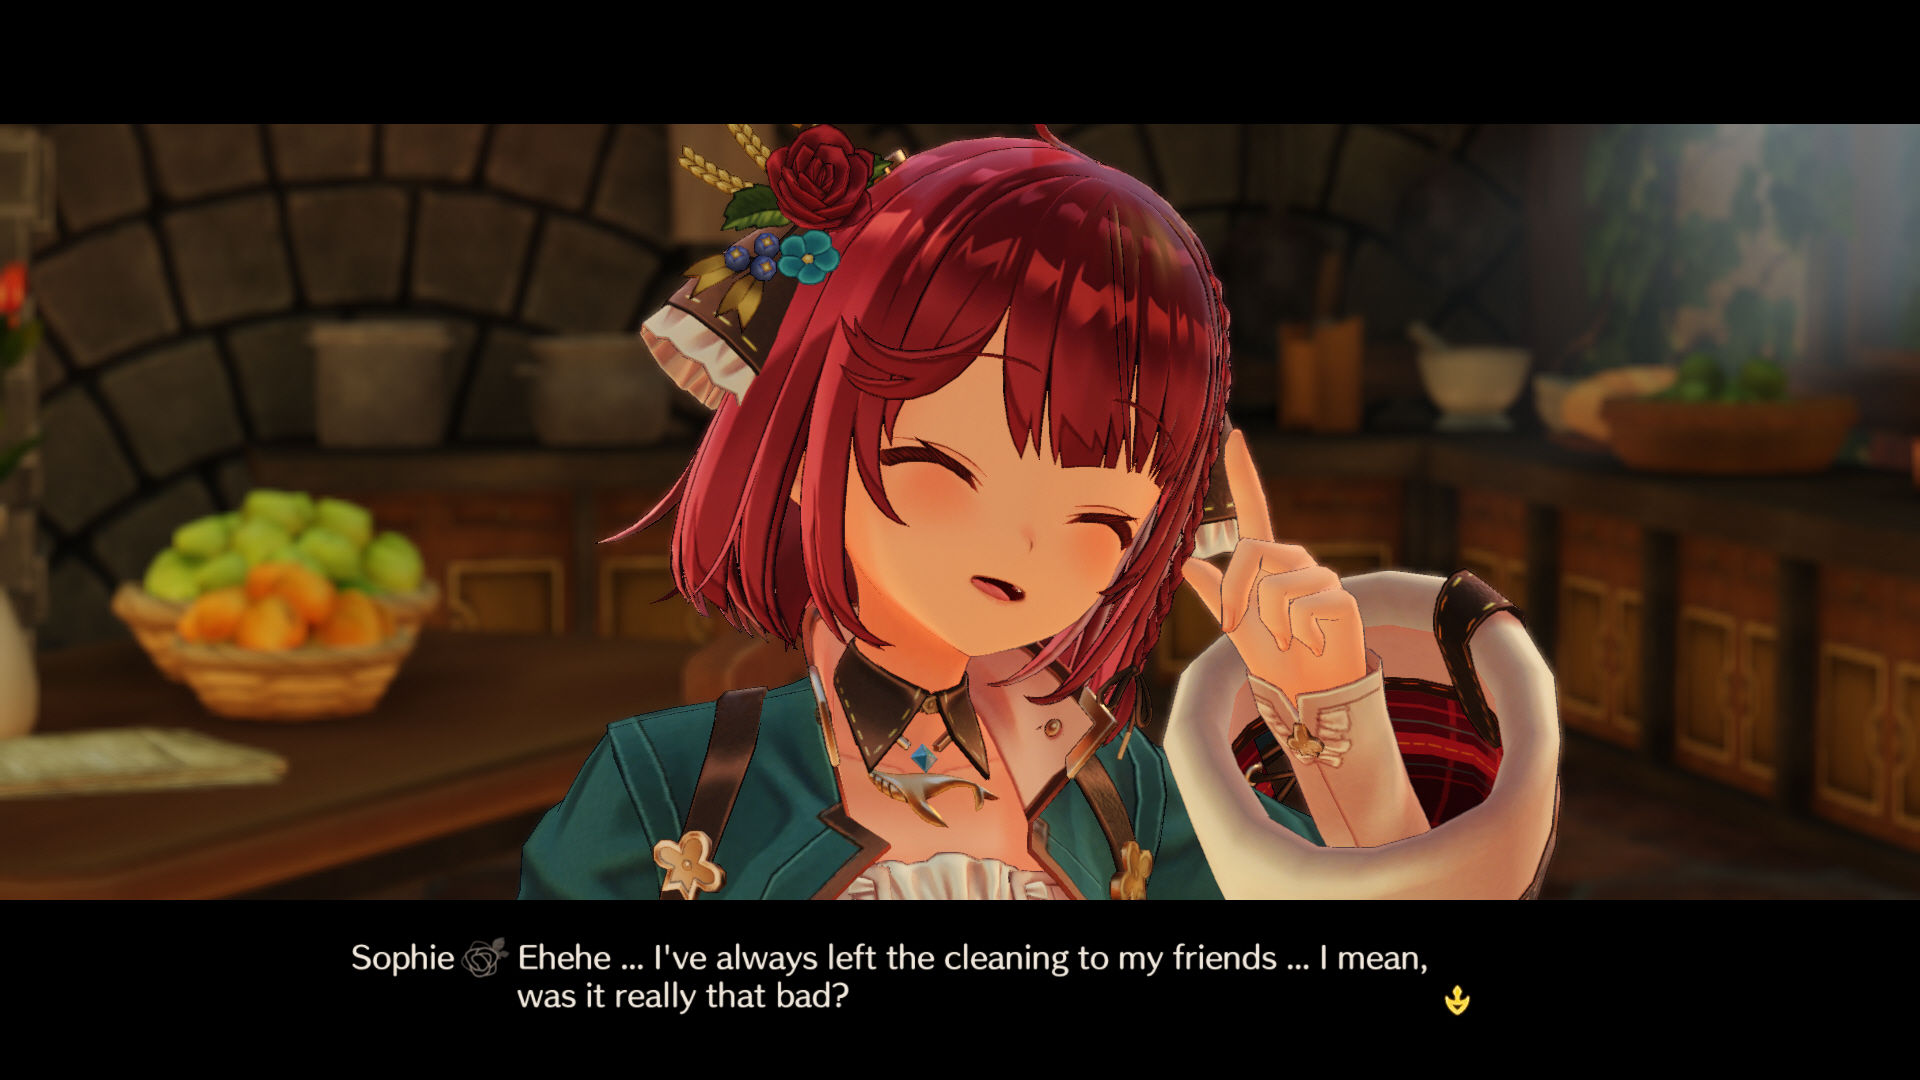 Atelier sophie 2 the alchemist of the mysterious dream screenshot 6 2